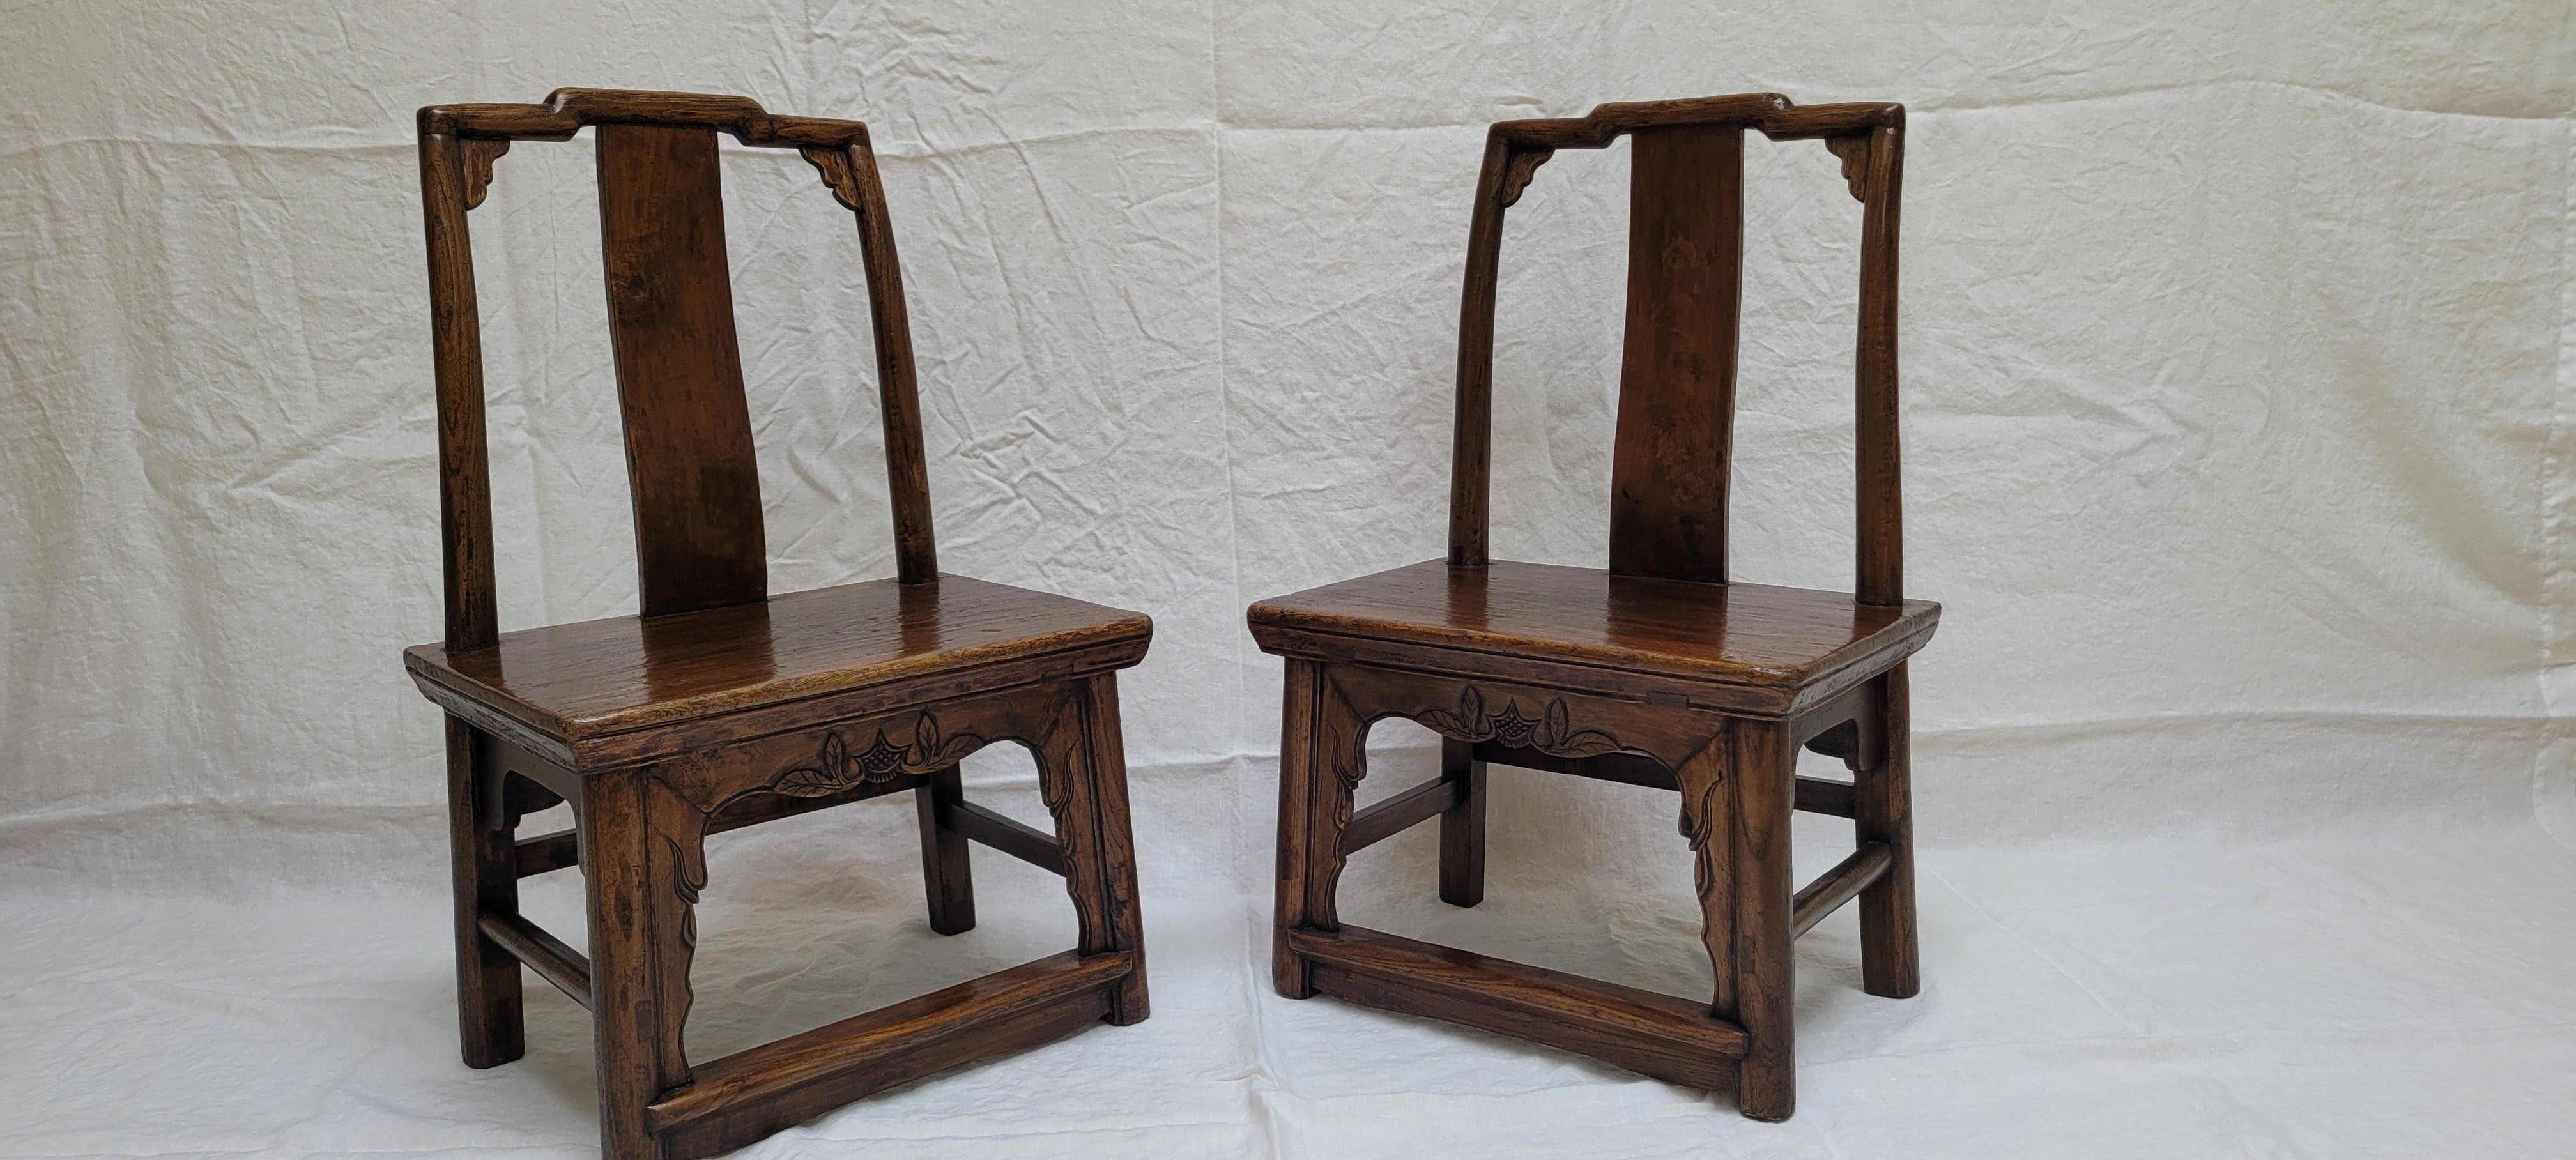 19th Century Pair of Children's Chairs For Sale 3